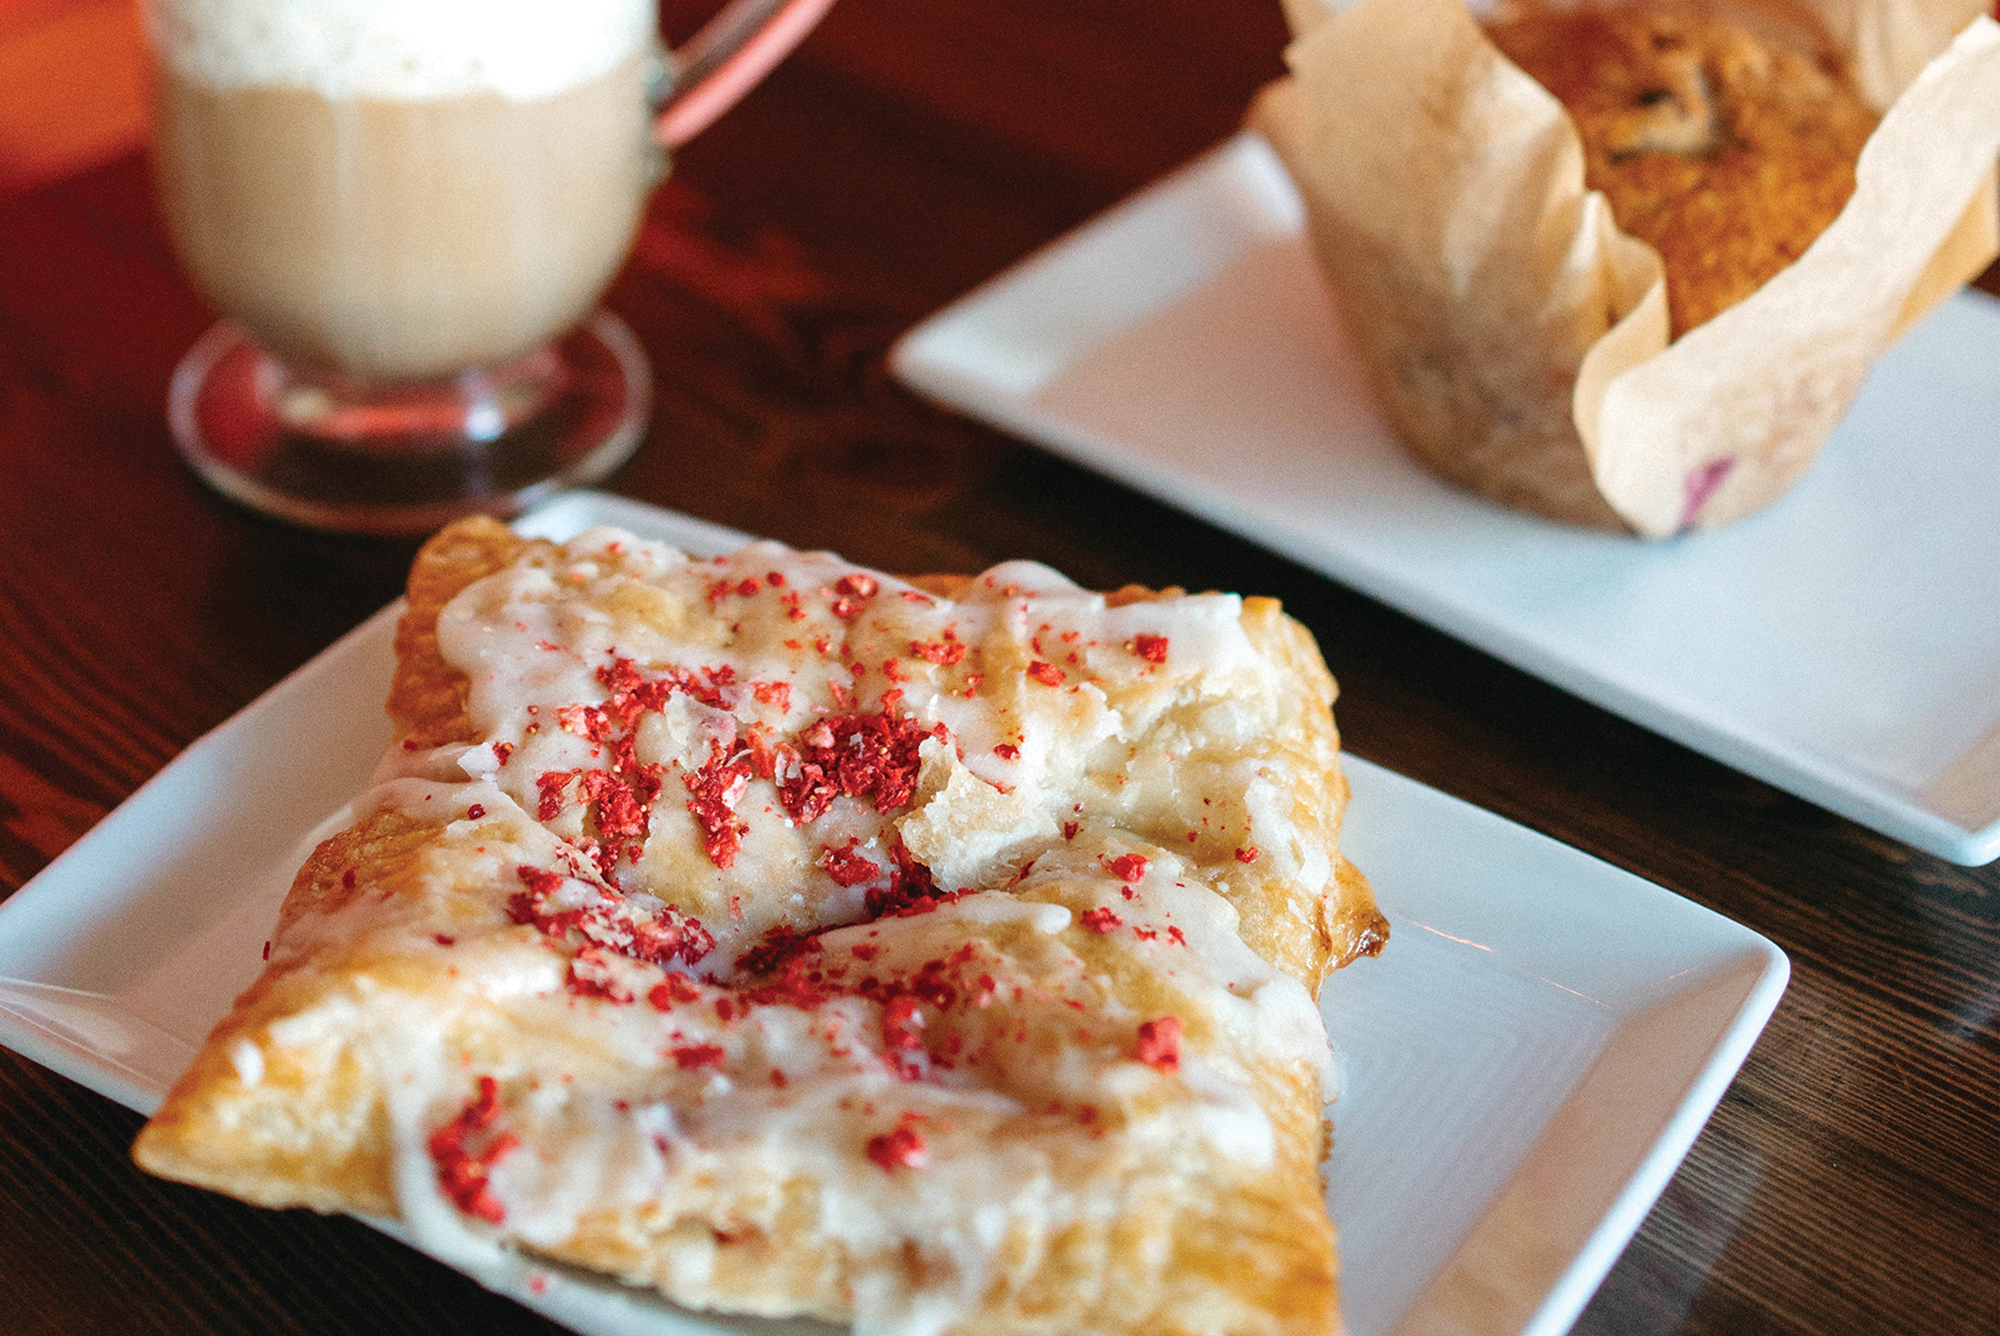 Fresh baked pastries and hot coffee, Breakfast On the Go!